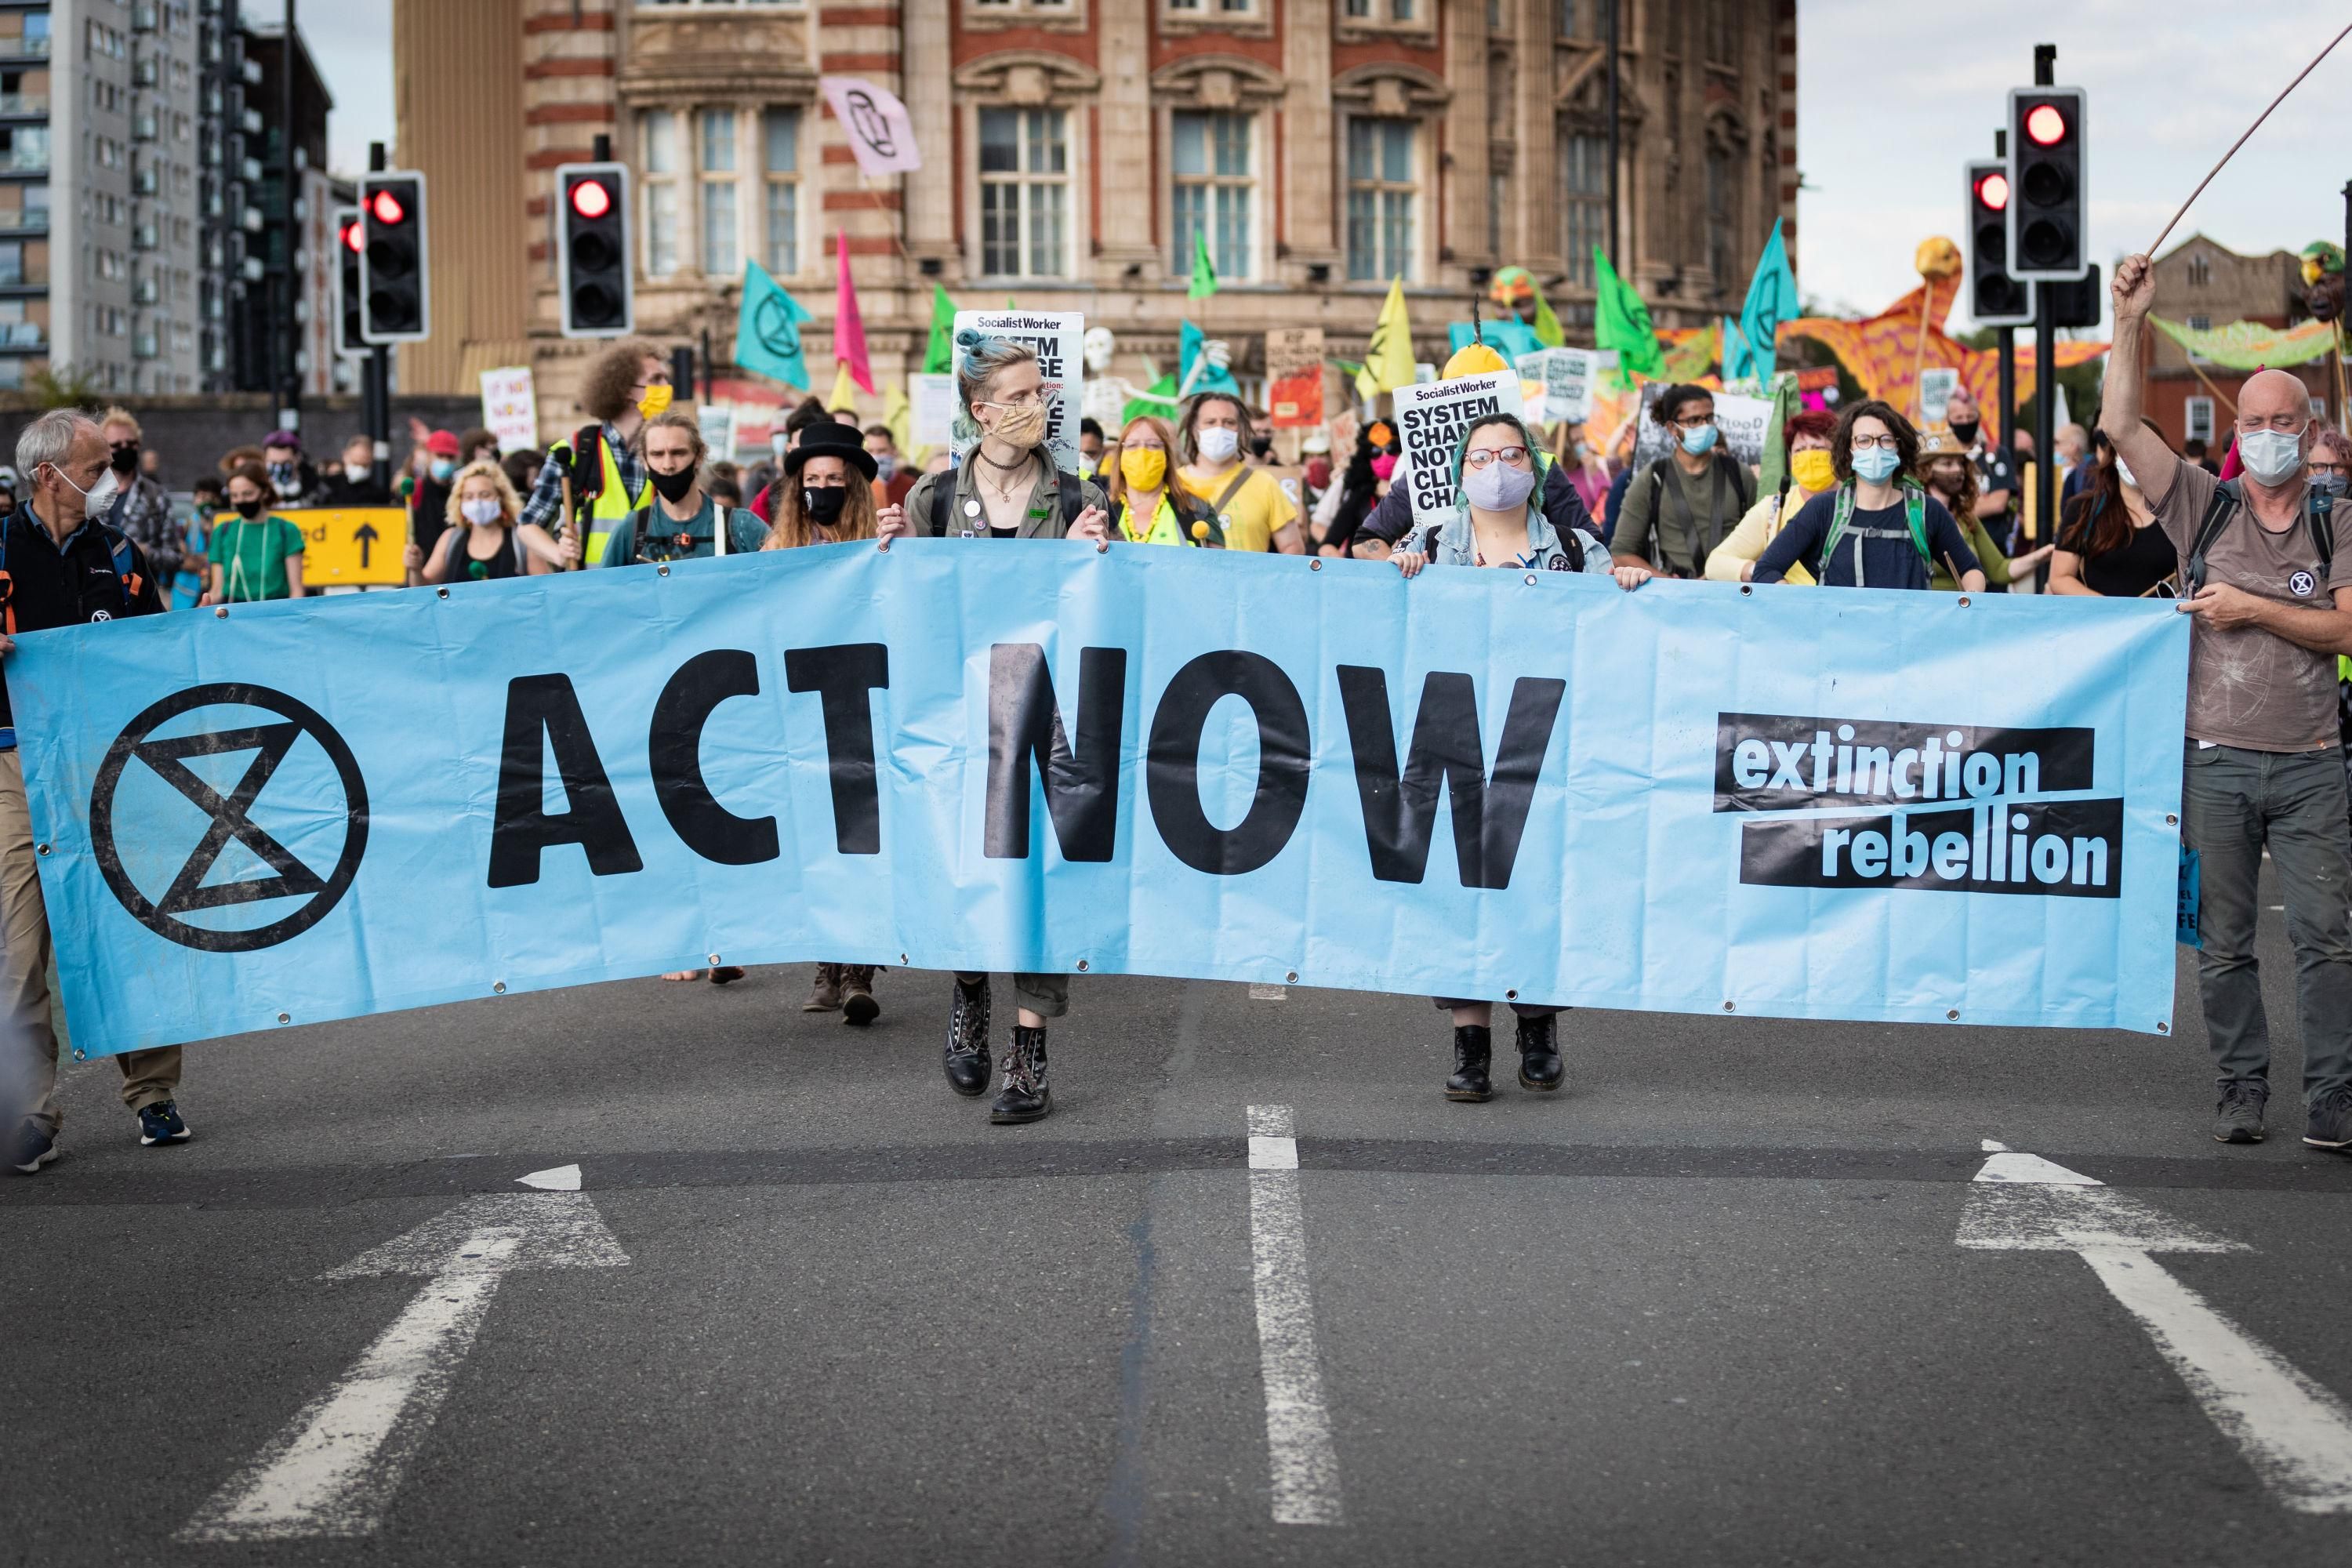 Members of Extinction Rebellion march in Manchester, United Kingdom on September 1, 2020